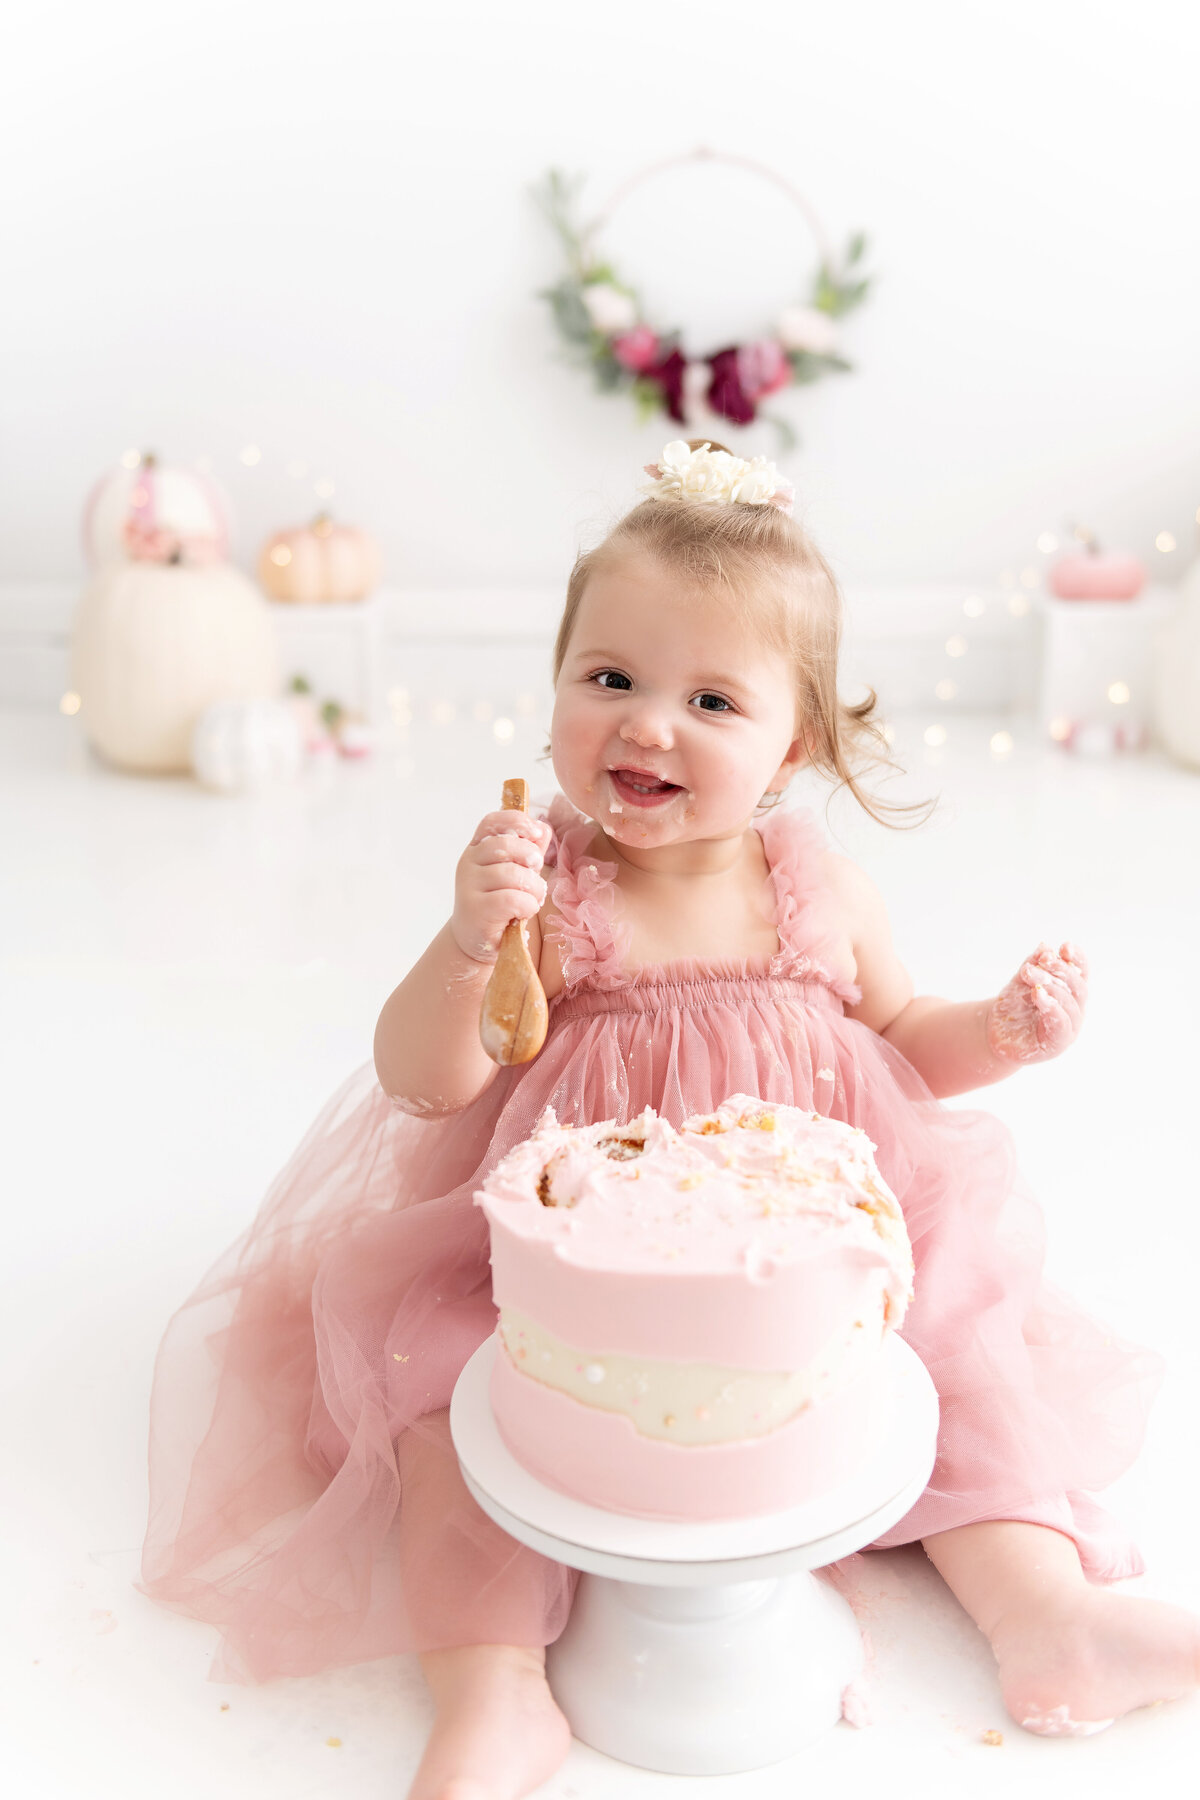 A childrens photographer Atlanta set up a cake for a toddler girl in a pink dress to smash